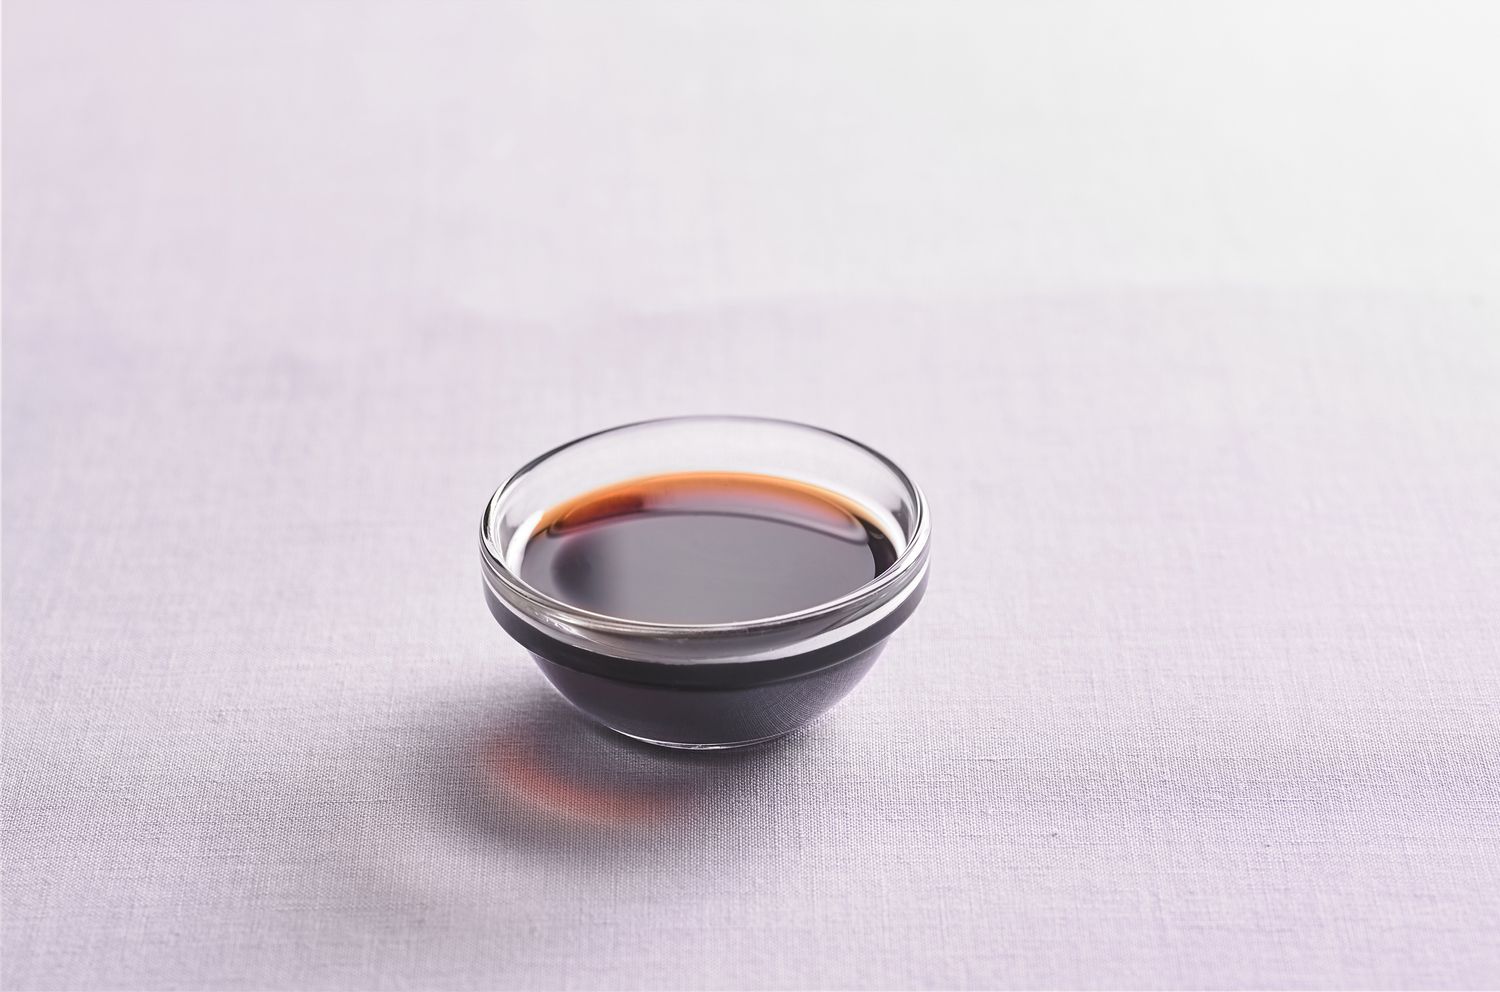 Small condiment dish filled with liquid soy sauce